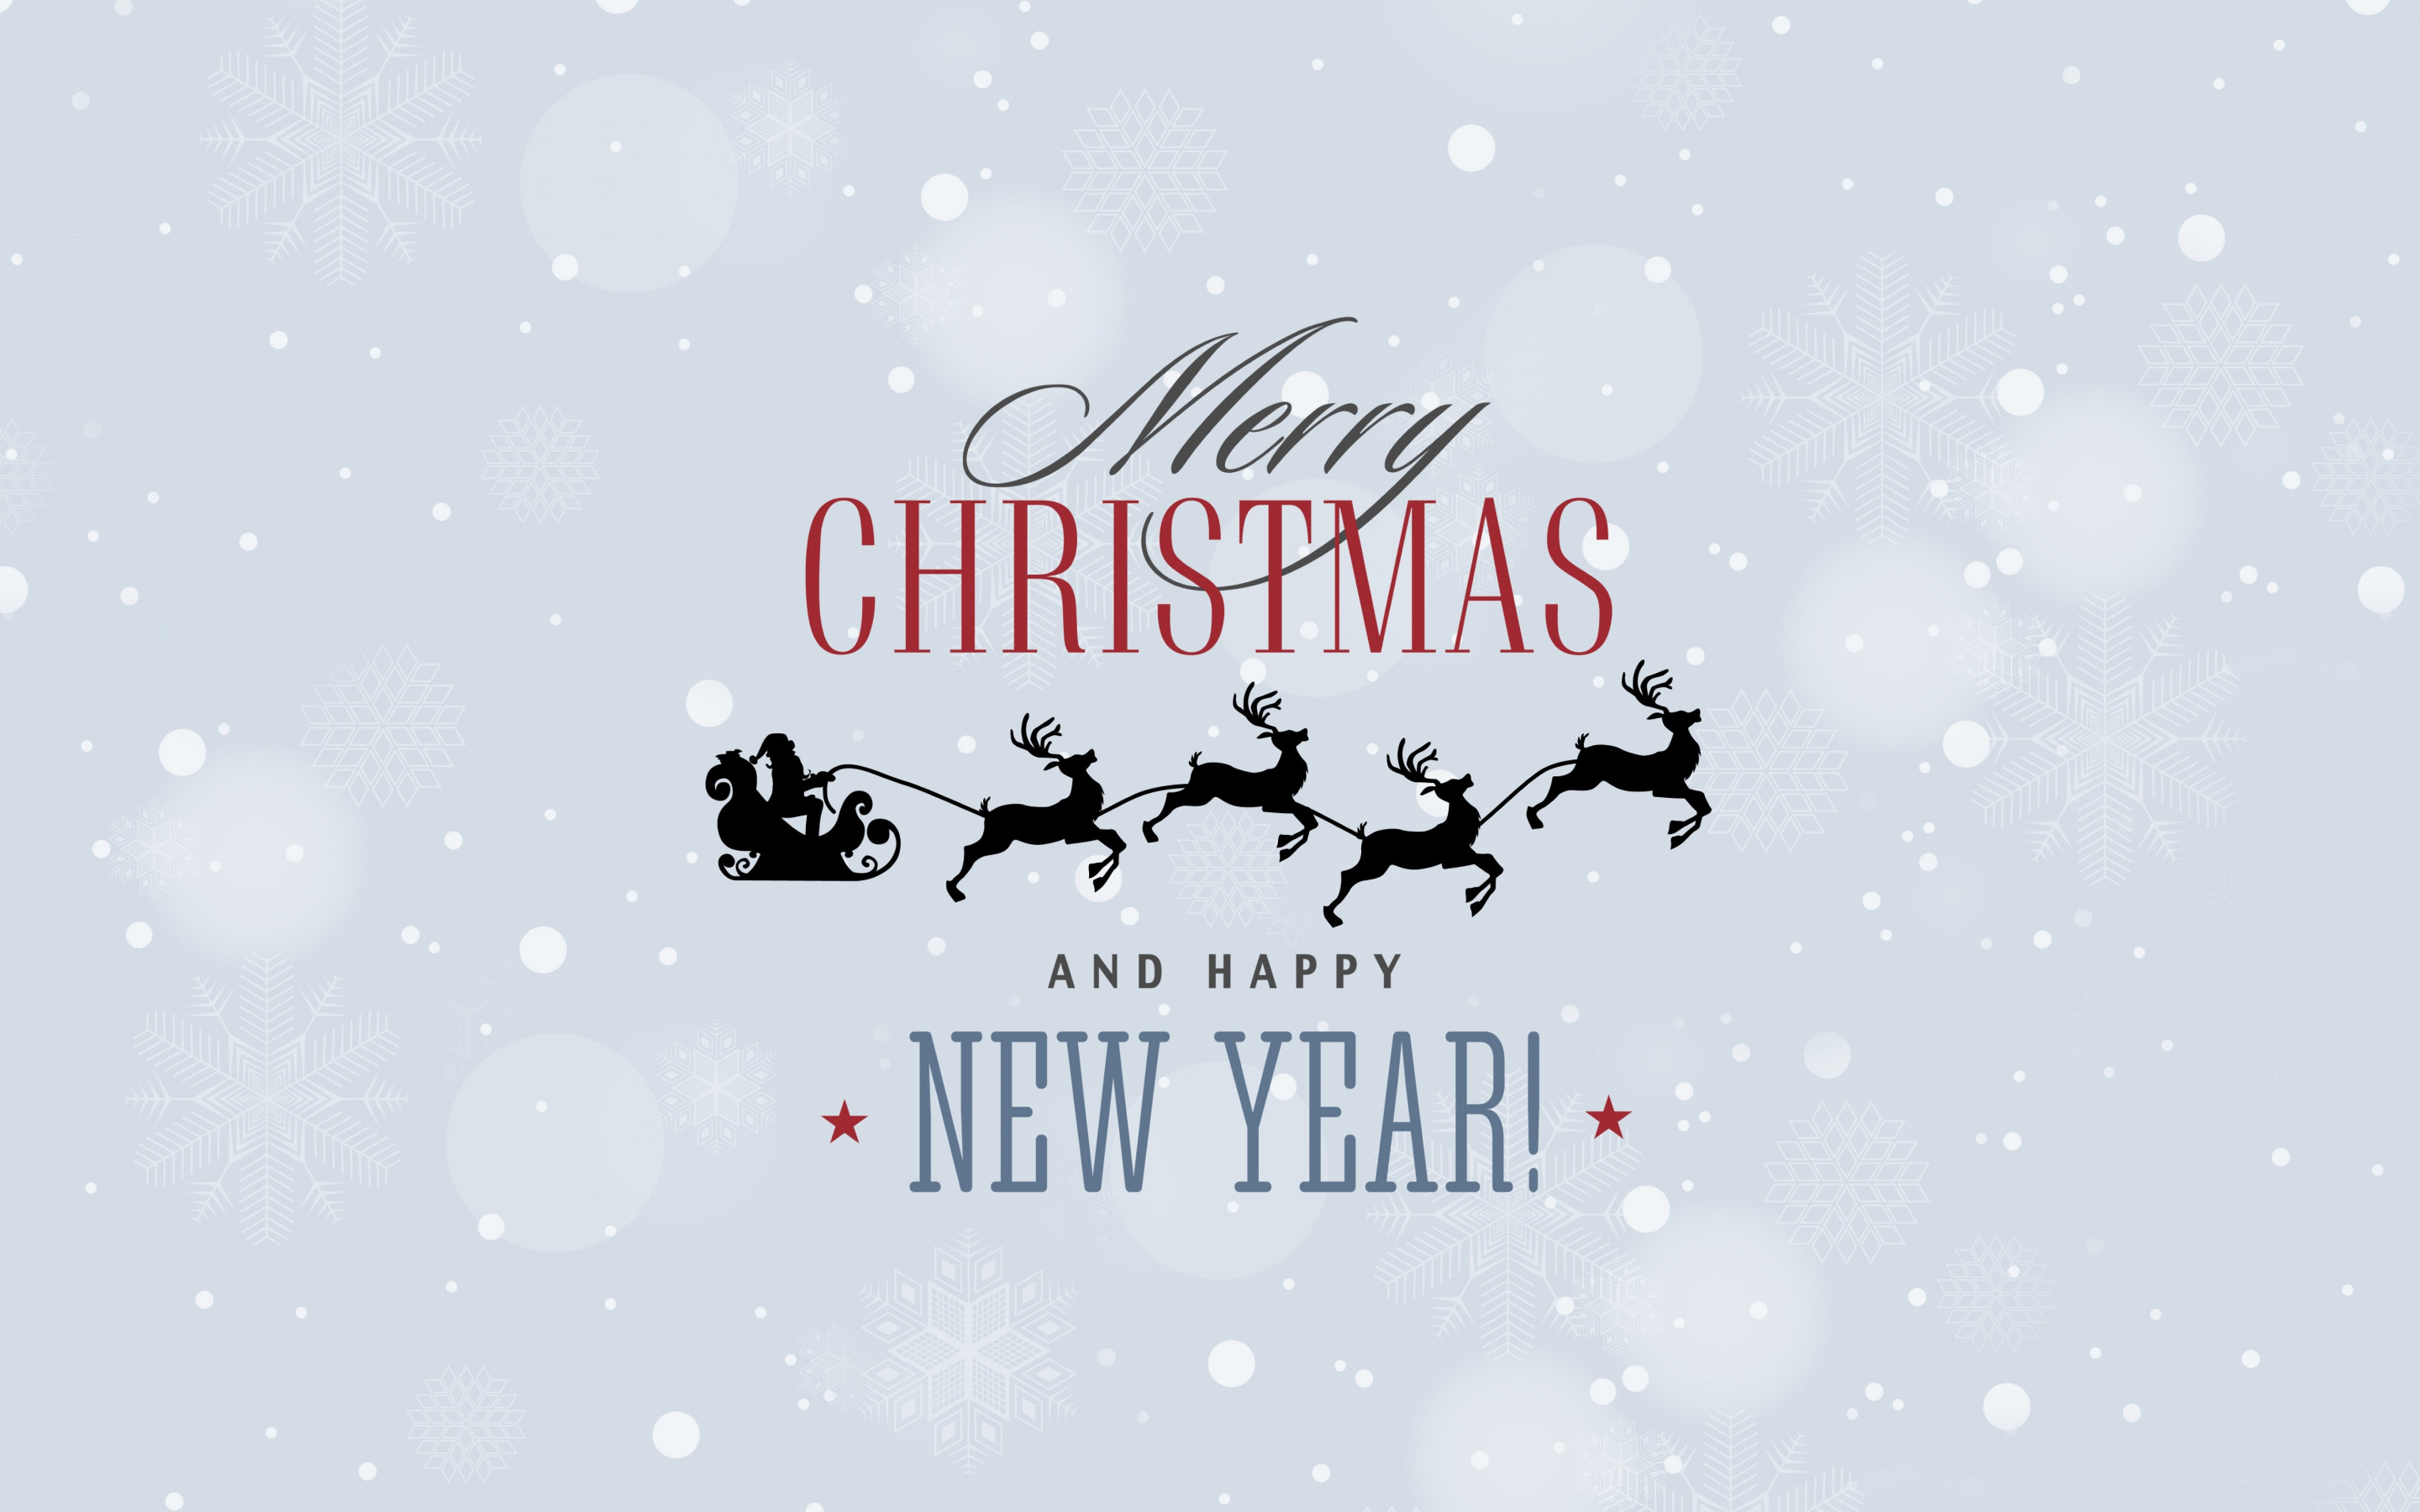 Merry Christmas and a Happy New Year wallpaper 2880x1800